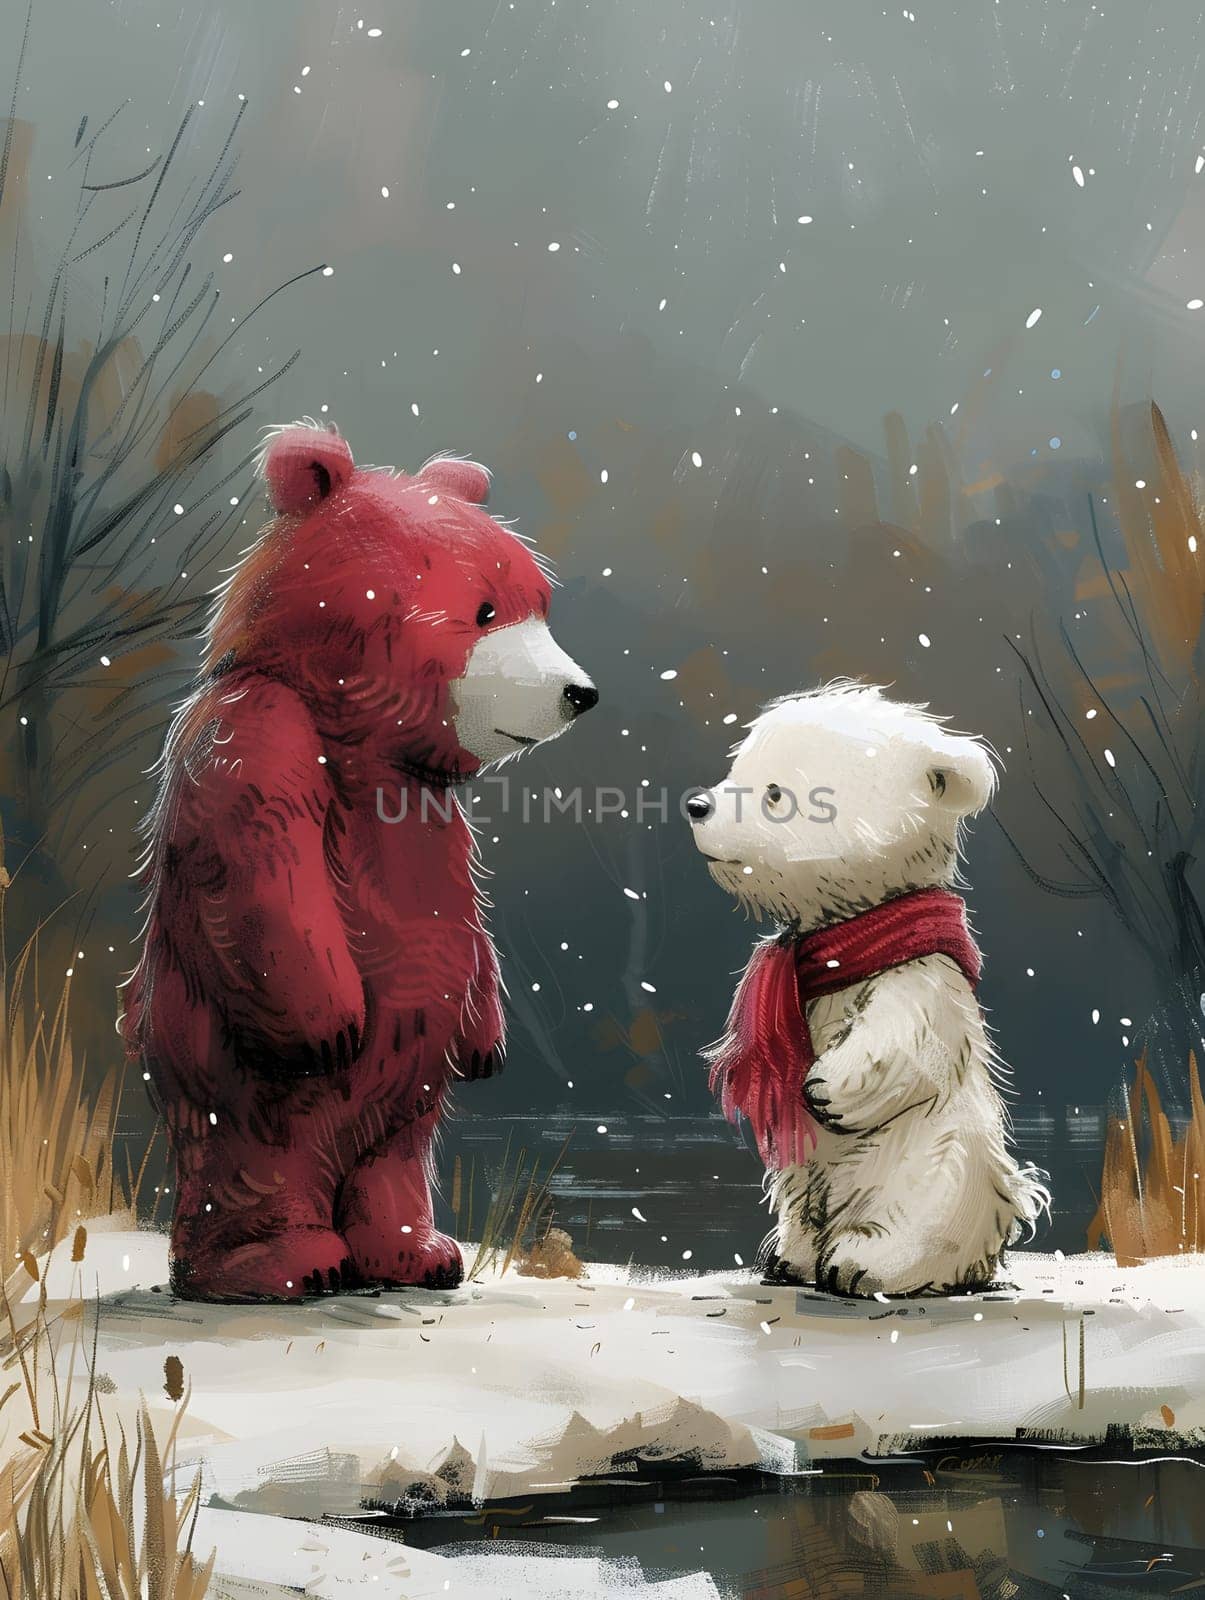 Two teddy bears, one red and one white, are standing side by side in the snowy landscape, their fur contrasting against the white snow